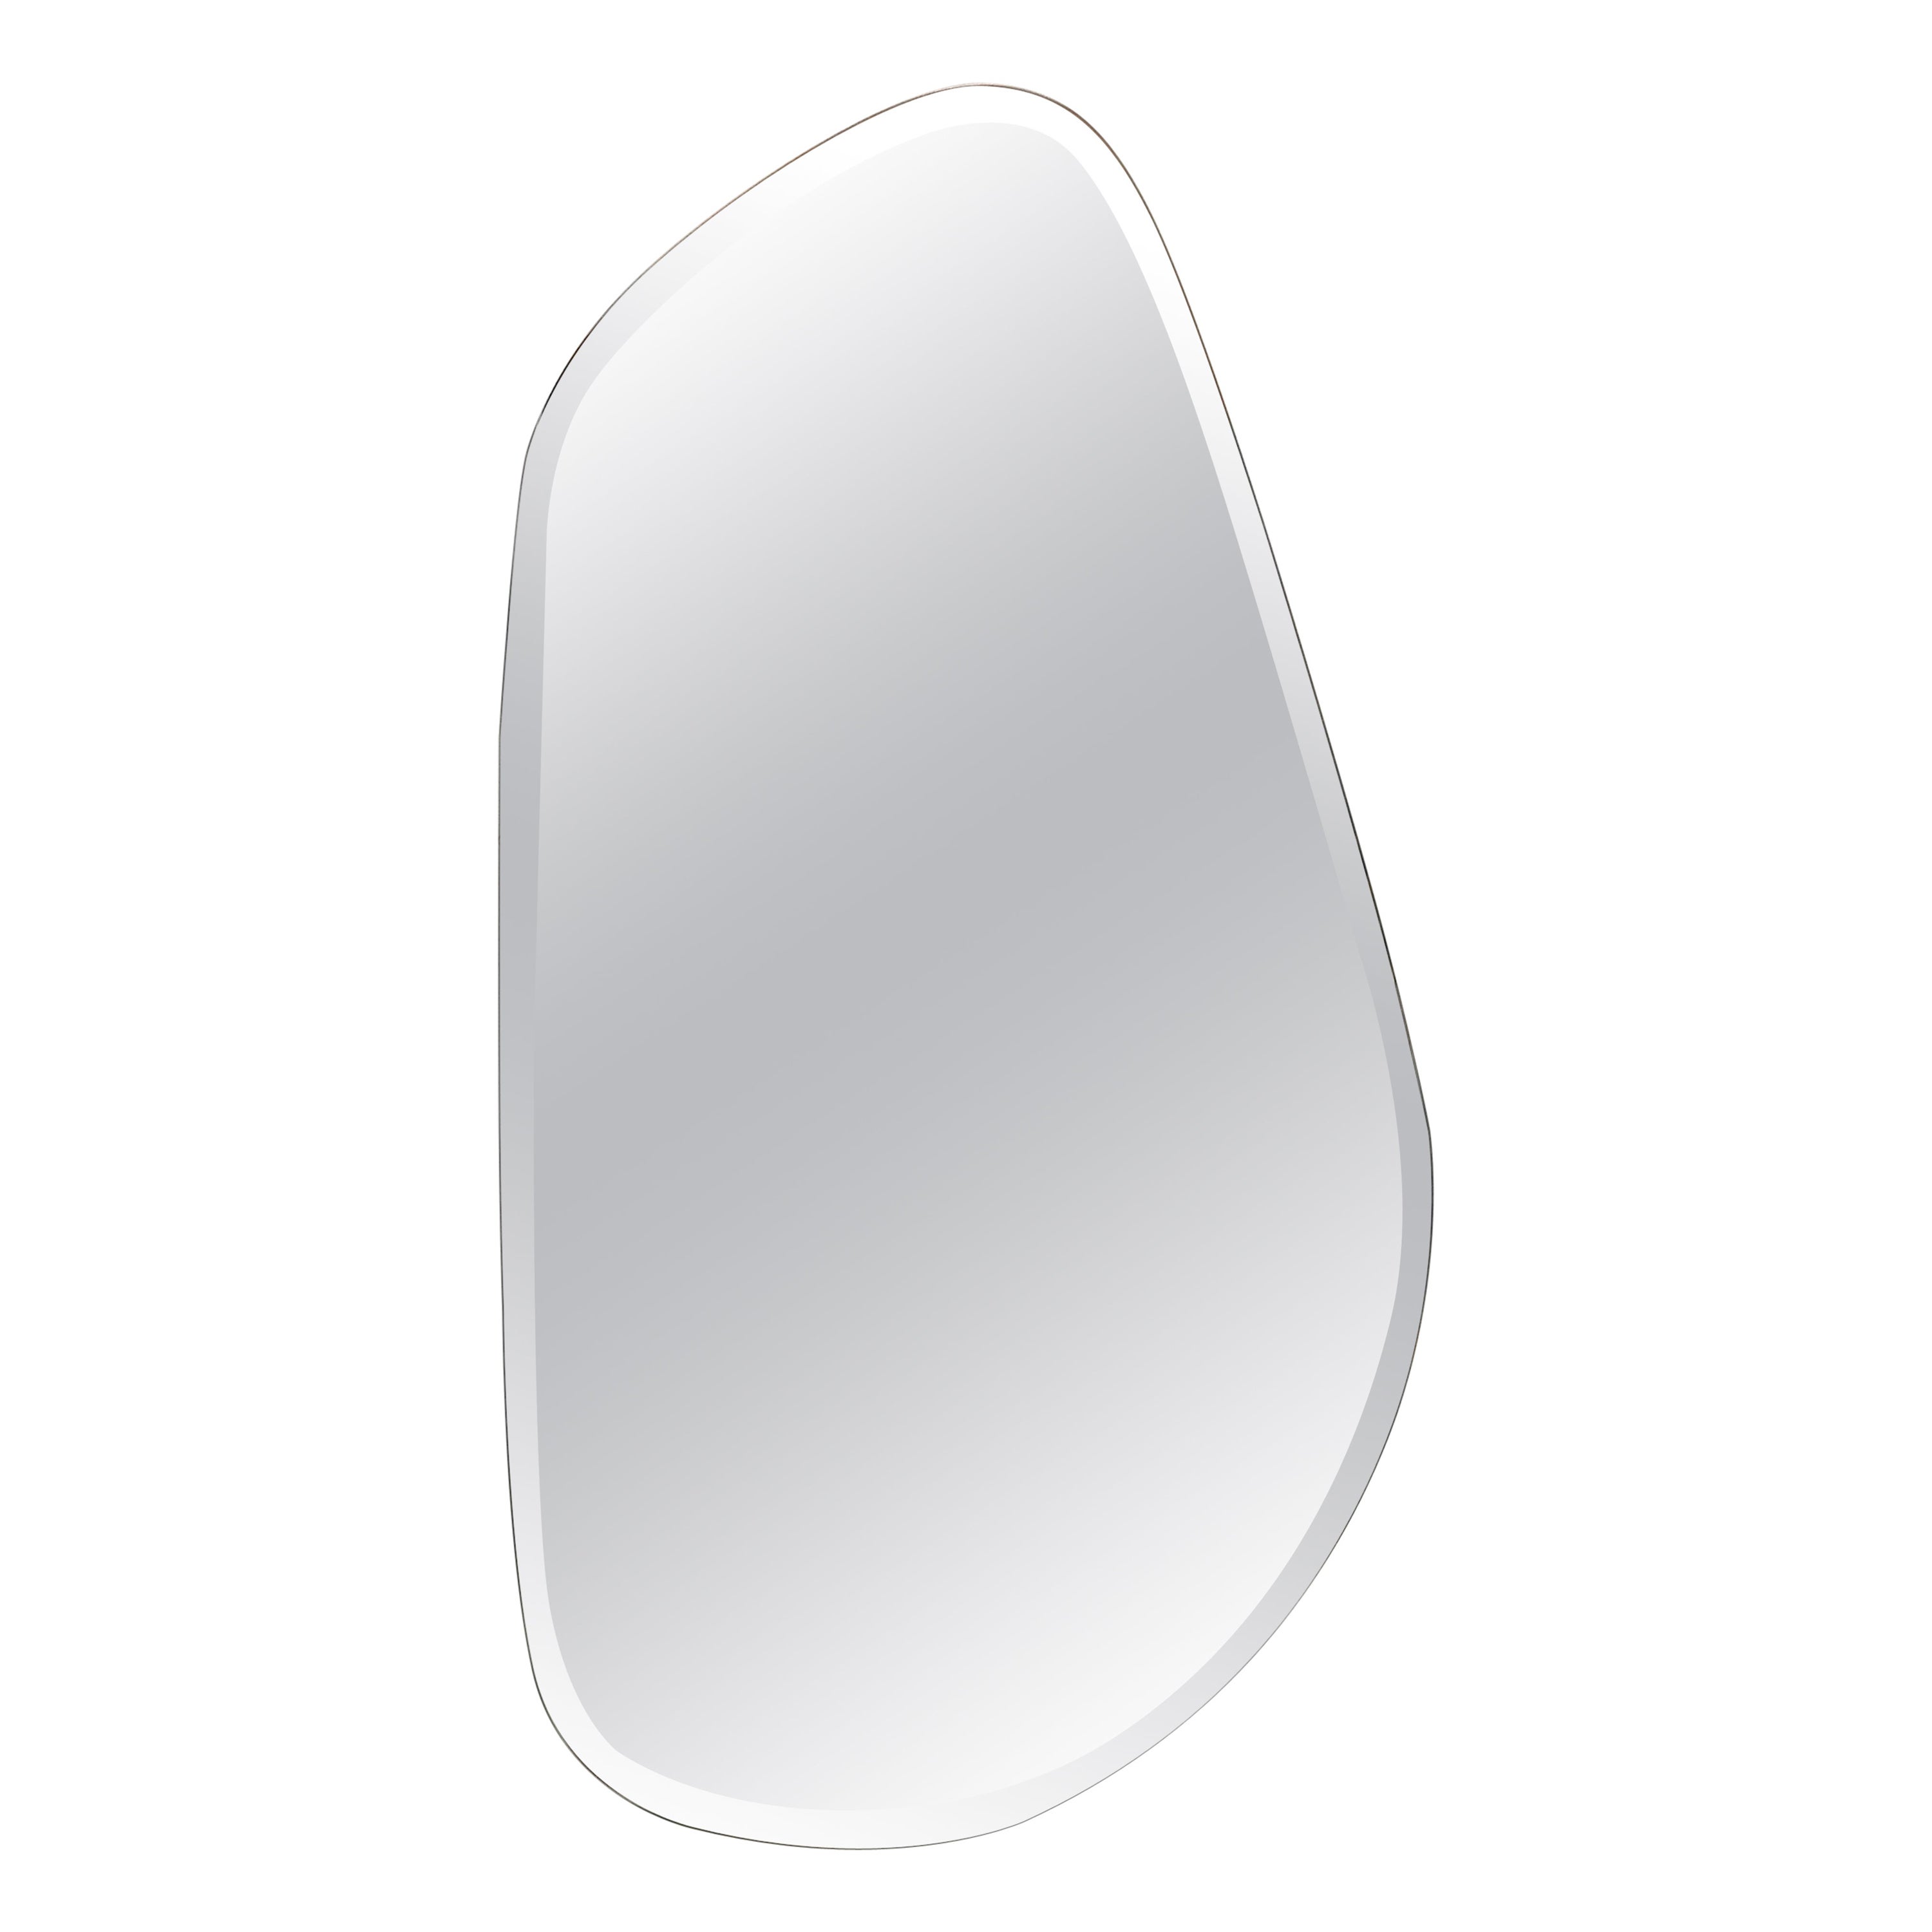 Organic Glass High Polish Mirror with Beveled Edge 42"H, Mary Ratcliffe Studio For Sale